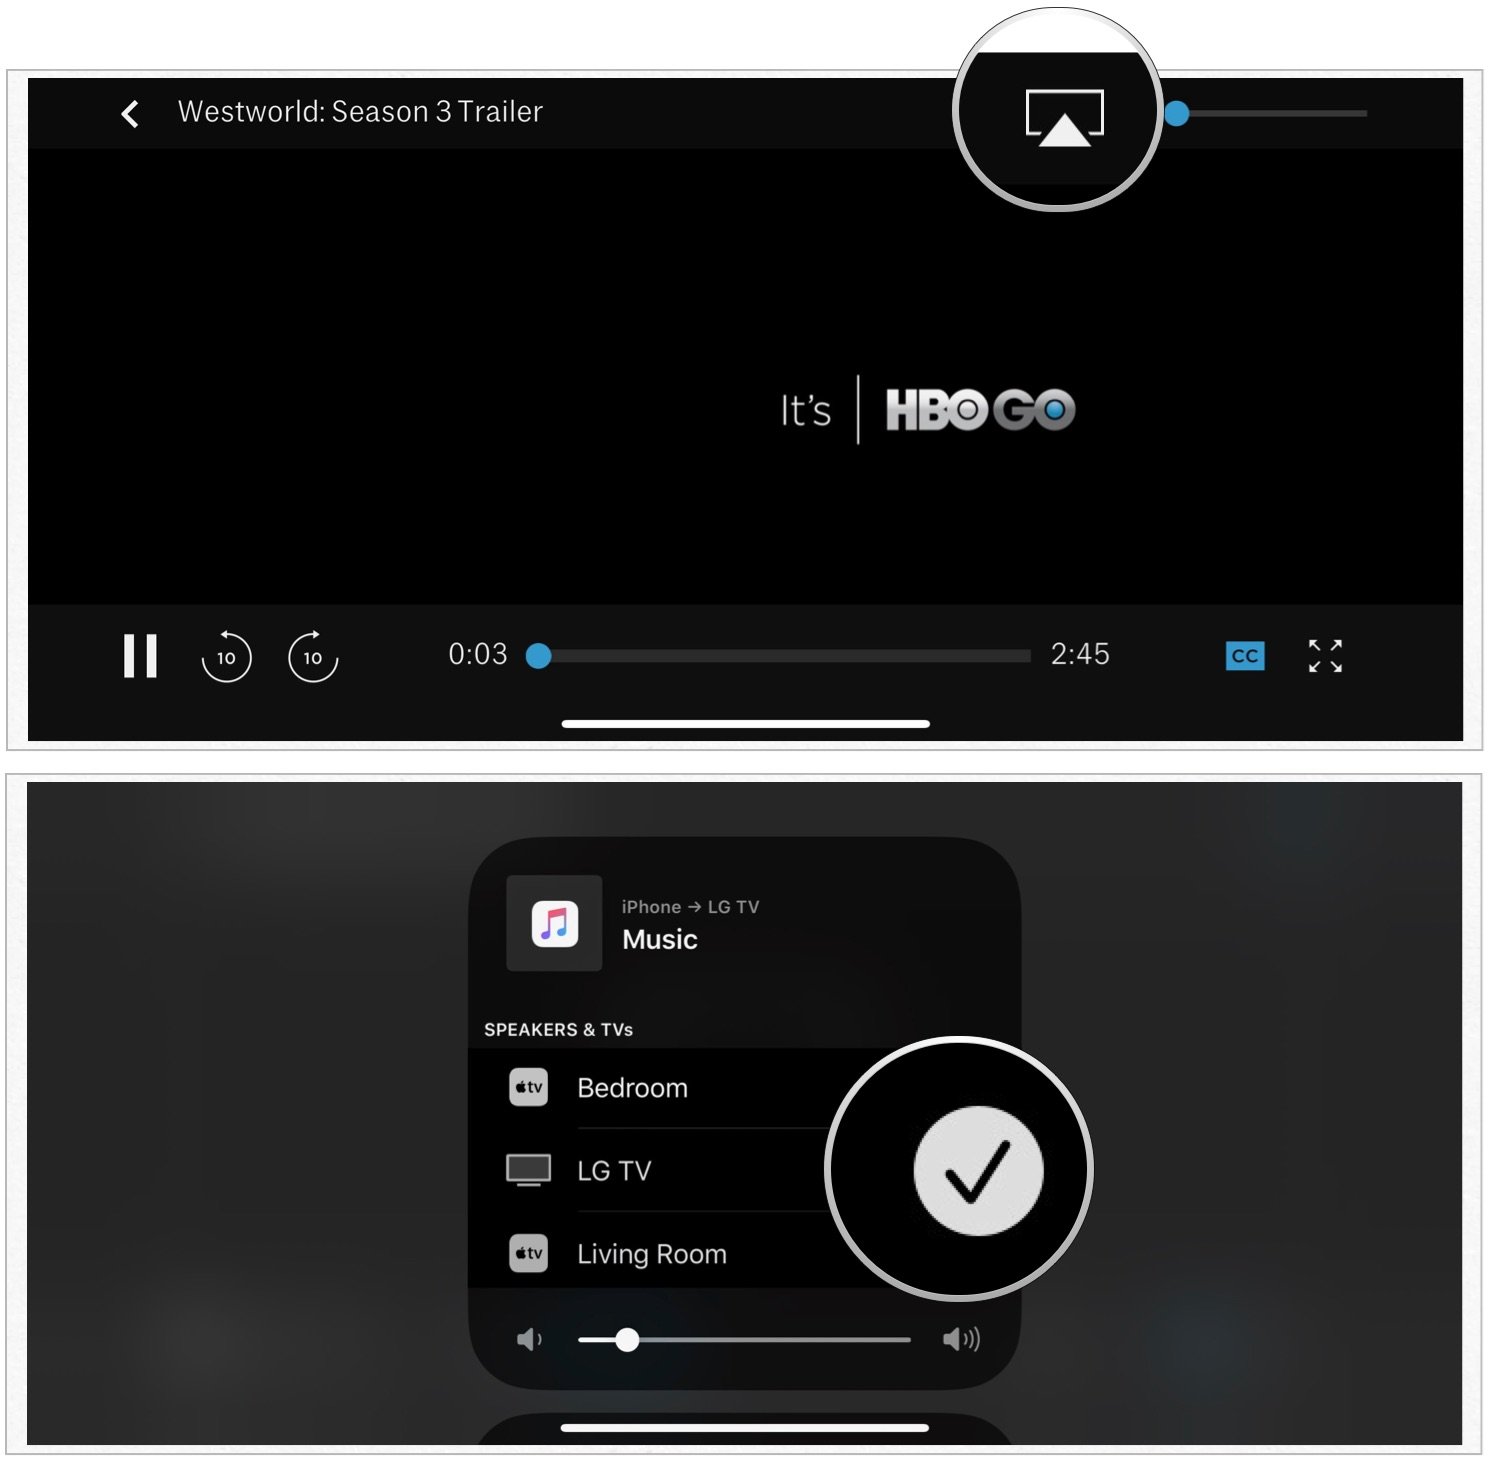 LG TV Airplay. Airplay на телевизоре. Airplay on LG TV. Android TV приложение AIRPAY.